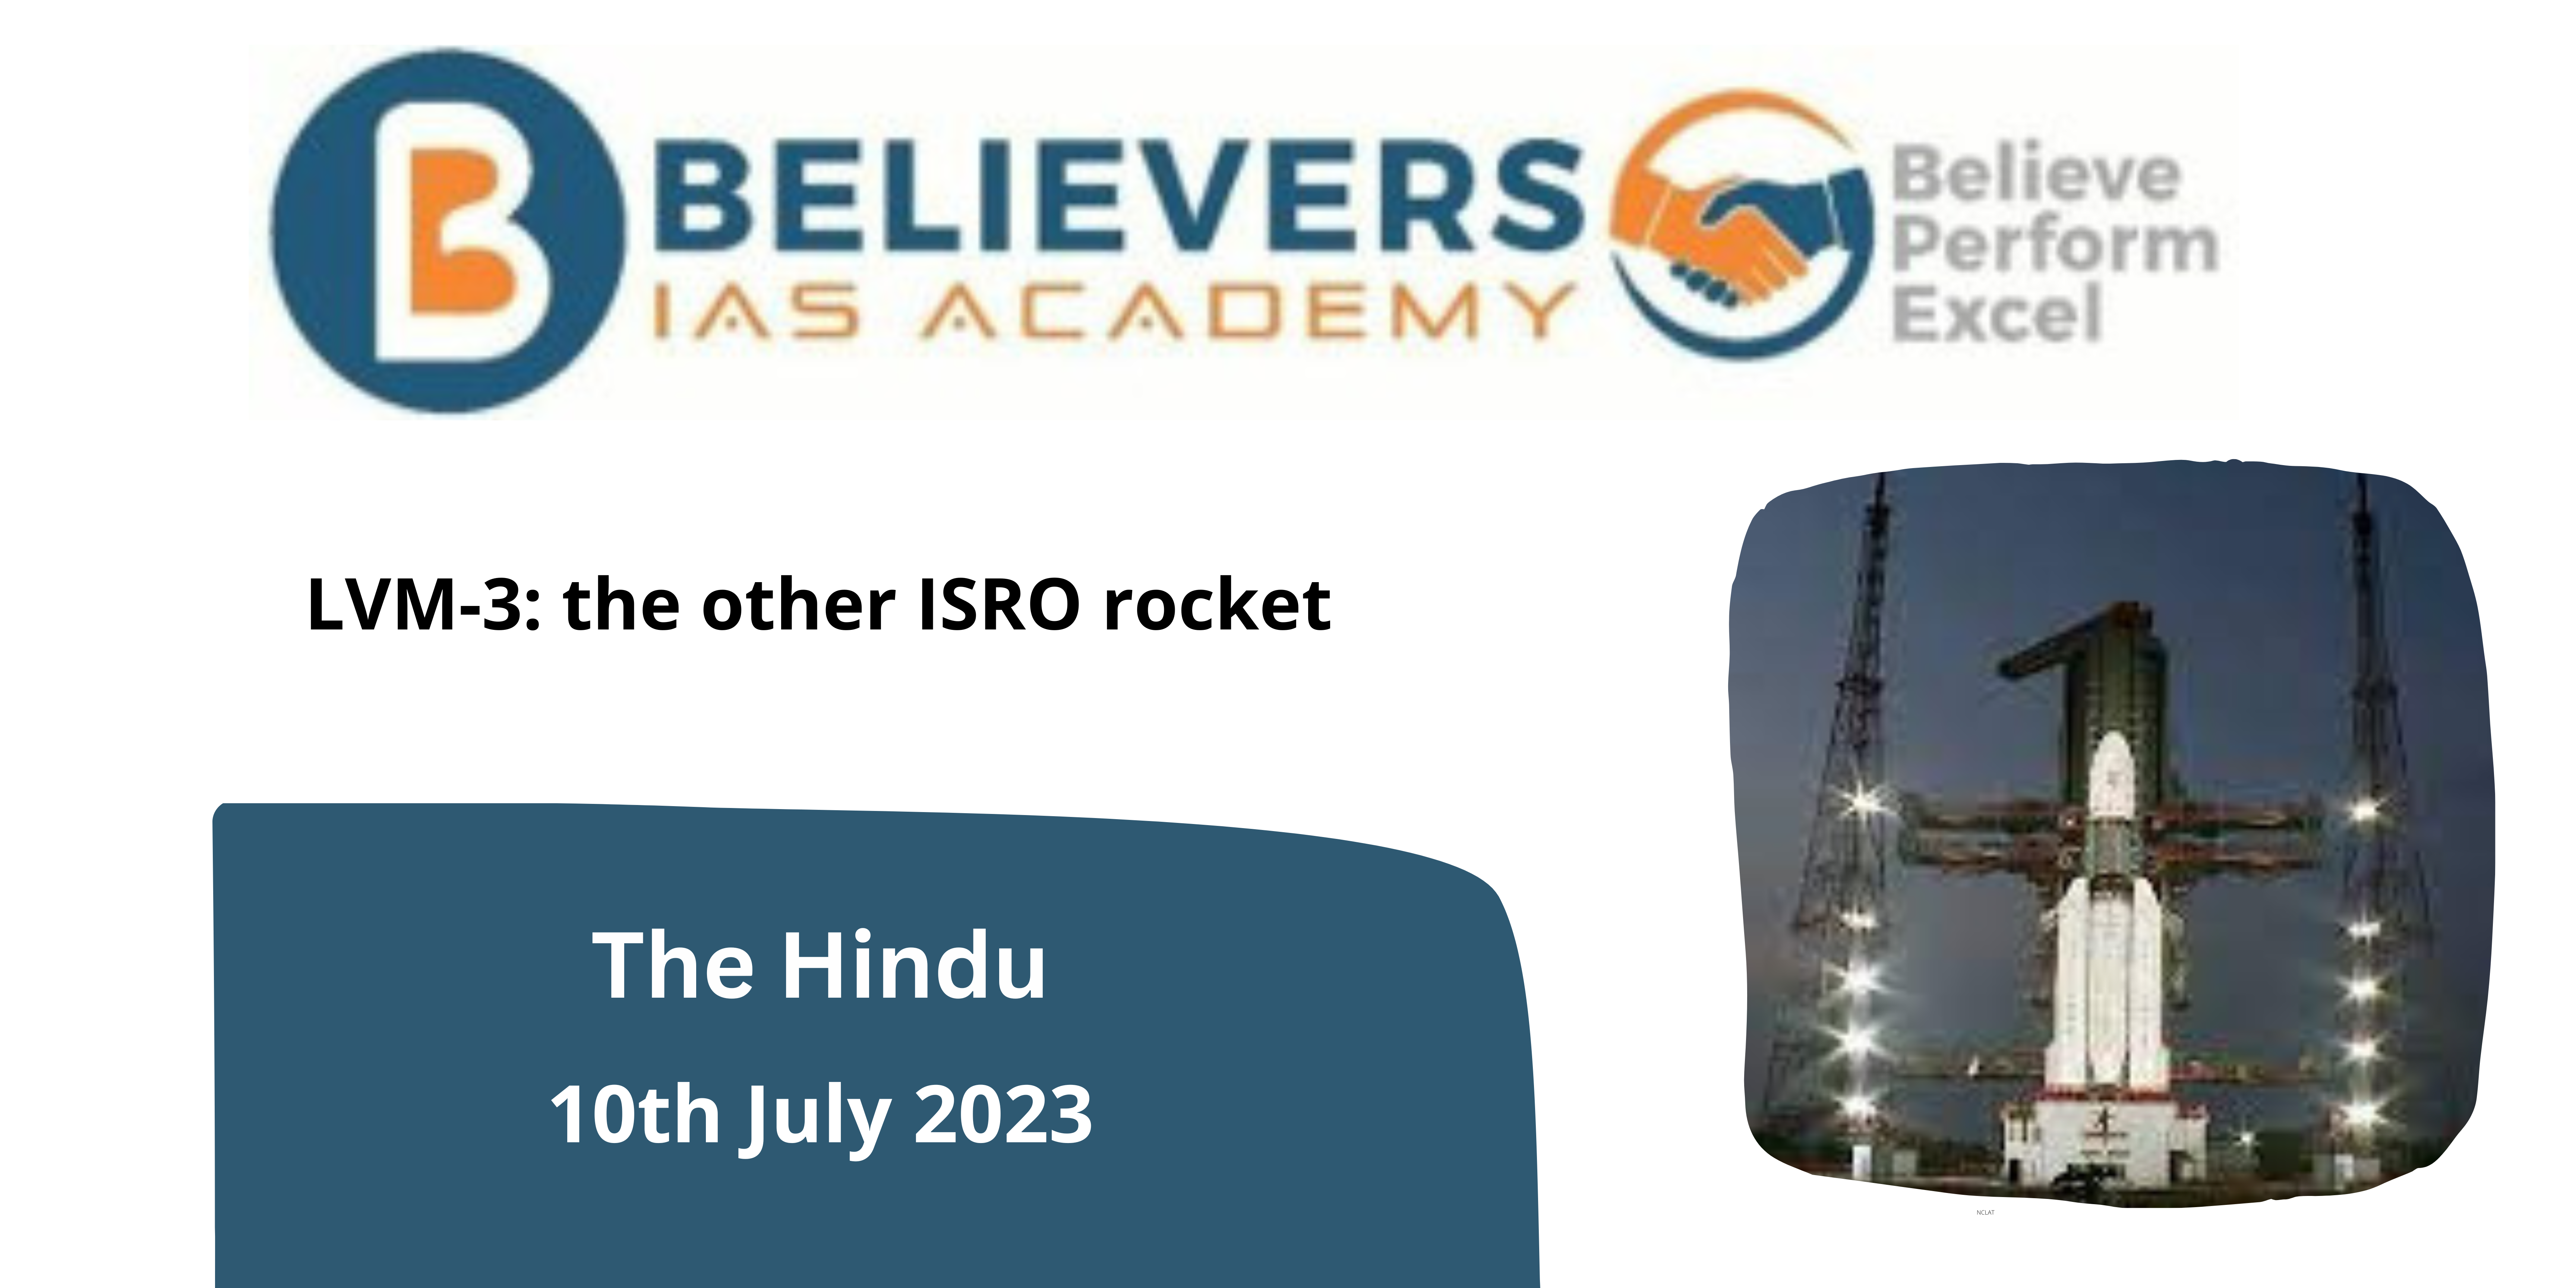 LVM-3: the other ISRO rocket